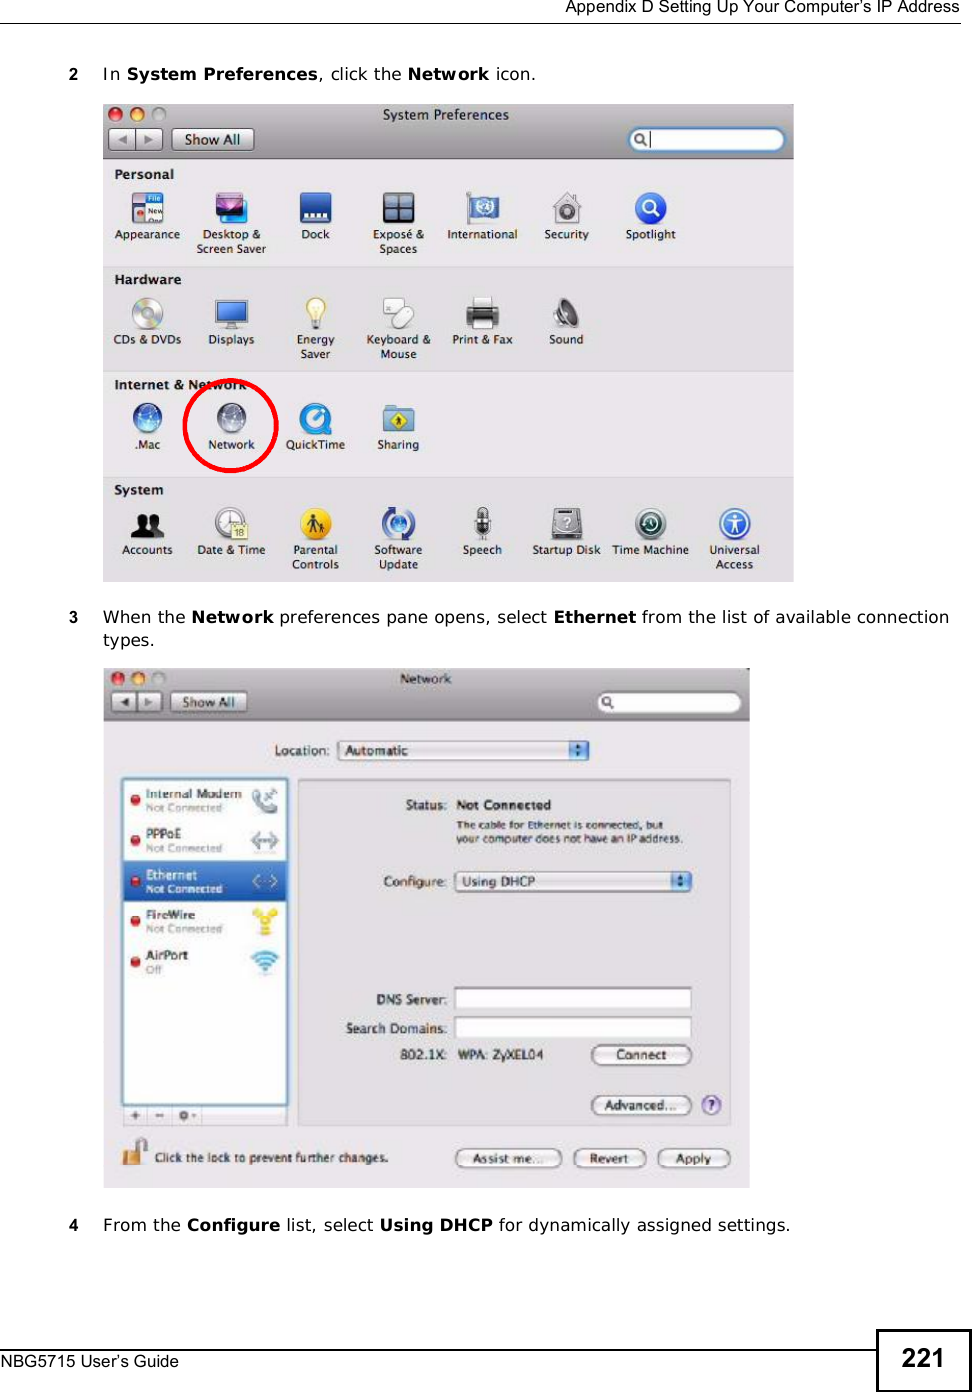  Appendix DSetting Up Your Computer’s IP AddressNBG5715 User’s Guide 2212In System Preferences, click the Network icon.3When the Network preferences pane opens, select Ethernet from the list of available connection types.4From the Configure list, select Using DHCP for dynamically assigned settings.